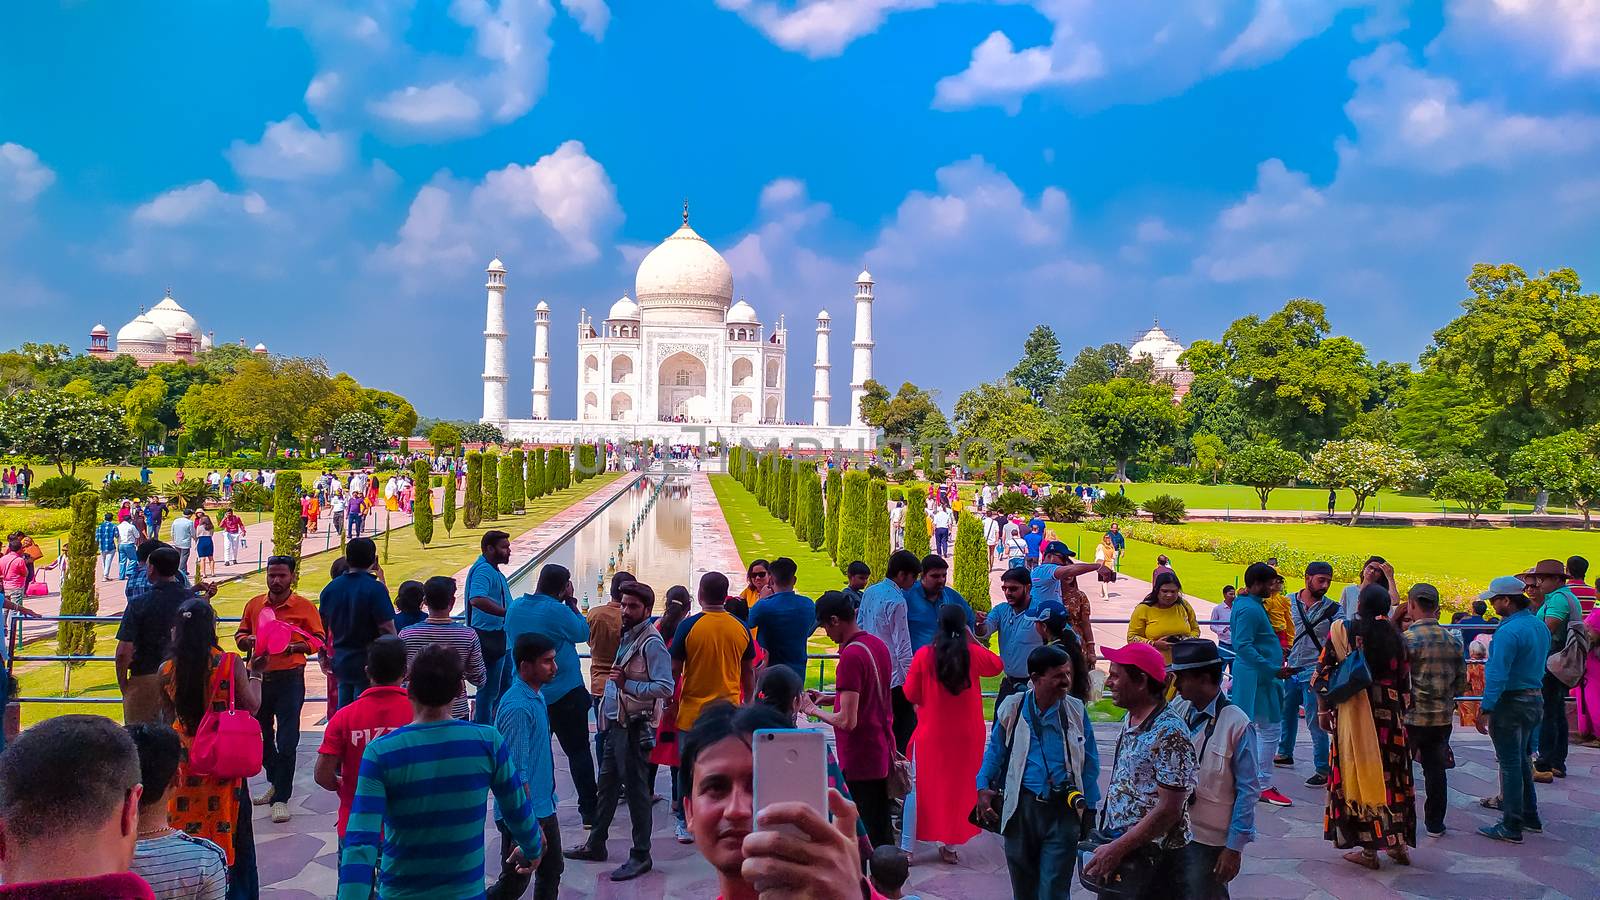 Crowed of people and visitors arrive in the Taj Mahal in sunset time. High crowds gathered in Taj Mahal in holiday weekends. Agra India Asia Pacific May 2019 by sudiptabhowmick